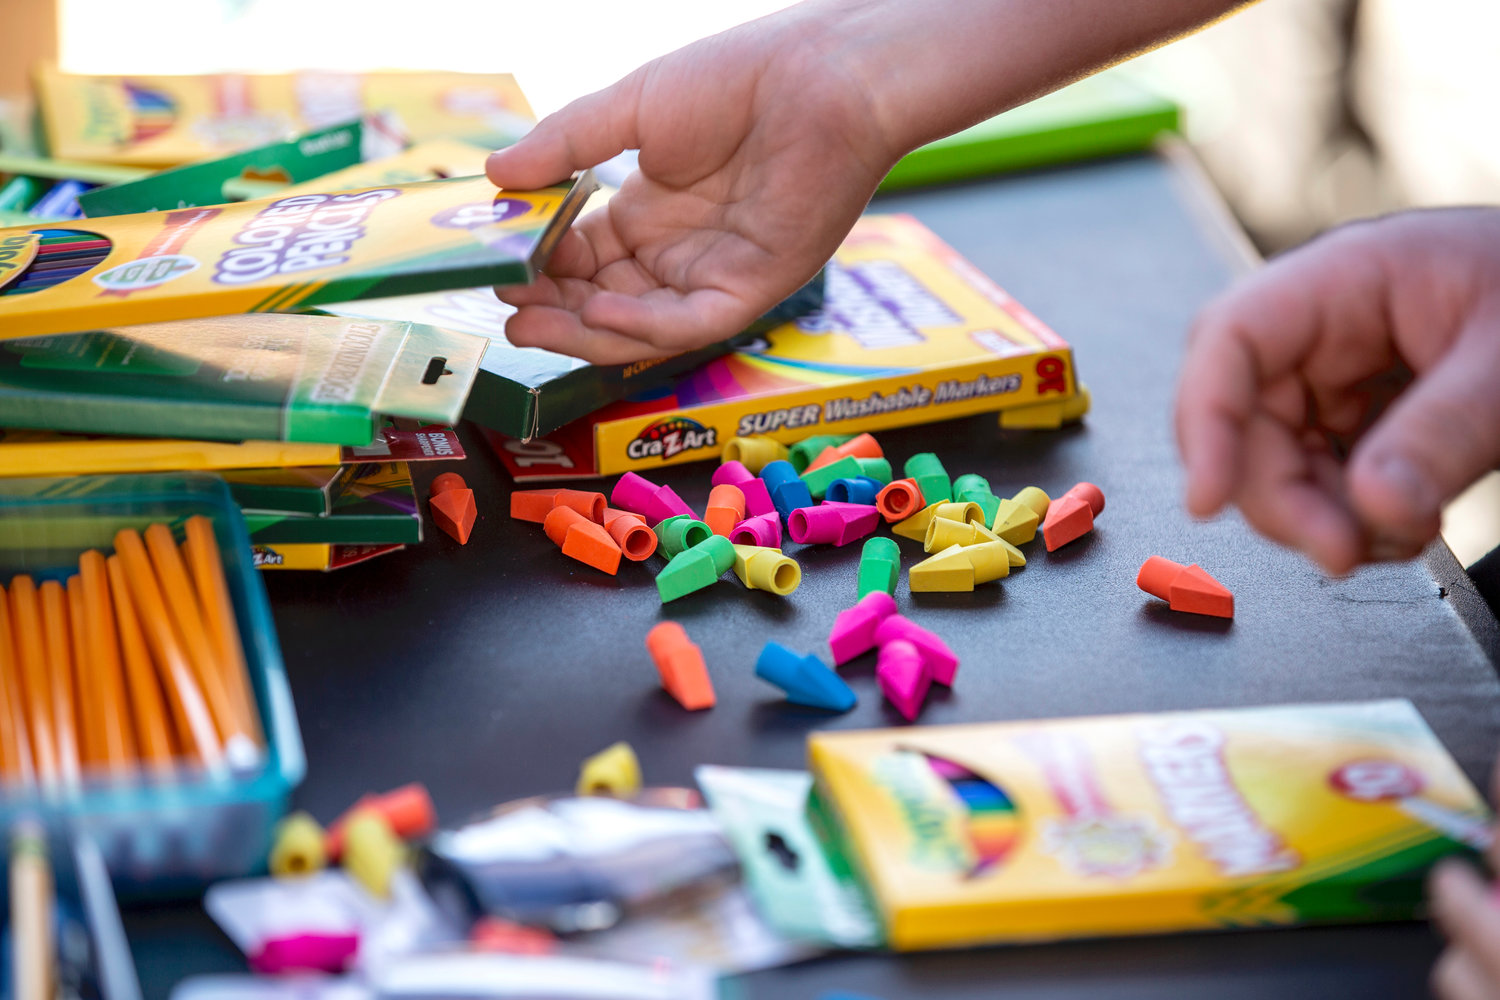 Children get free school supplies during a party in Steelton, Pa., on Aug. 13. Sangertown Square in New Hartford will host a Tykes Tuesday Back to School Bash from 11 a.m. to noon, Aug. 23.